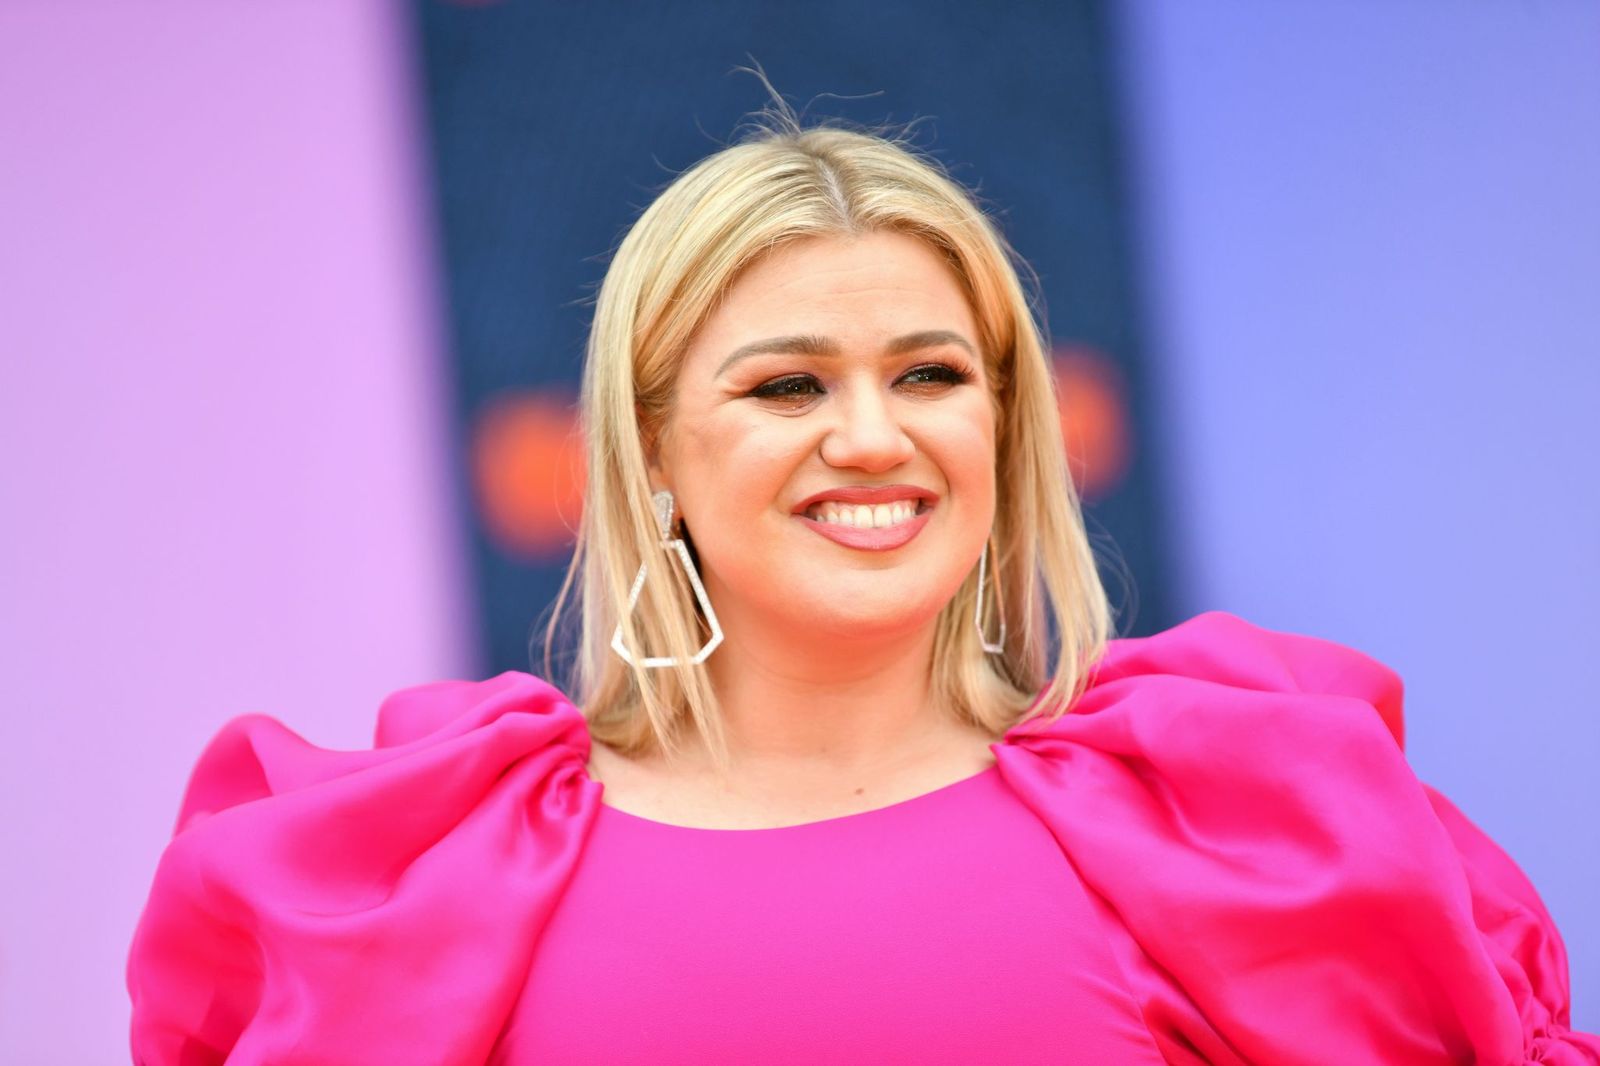 Kelly Clarkson at STX Films World Premiere of "UglyDolls" at Regal Cinemas L.A. Live on April 27, 2019 in Los Angeles, California. | Photo: Getty Images